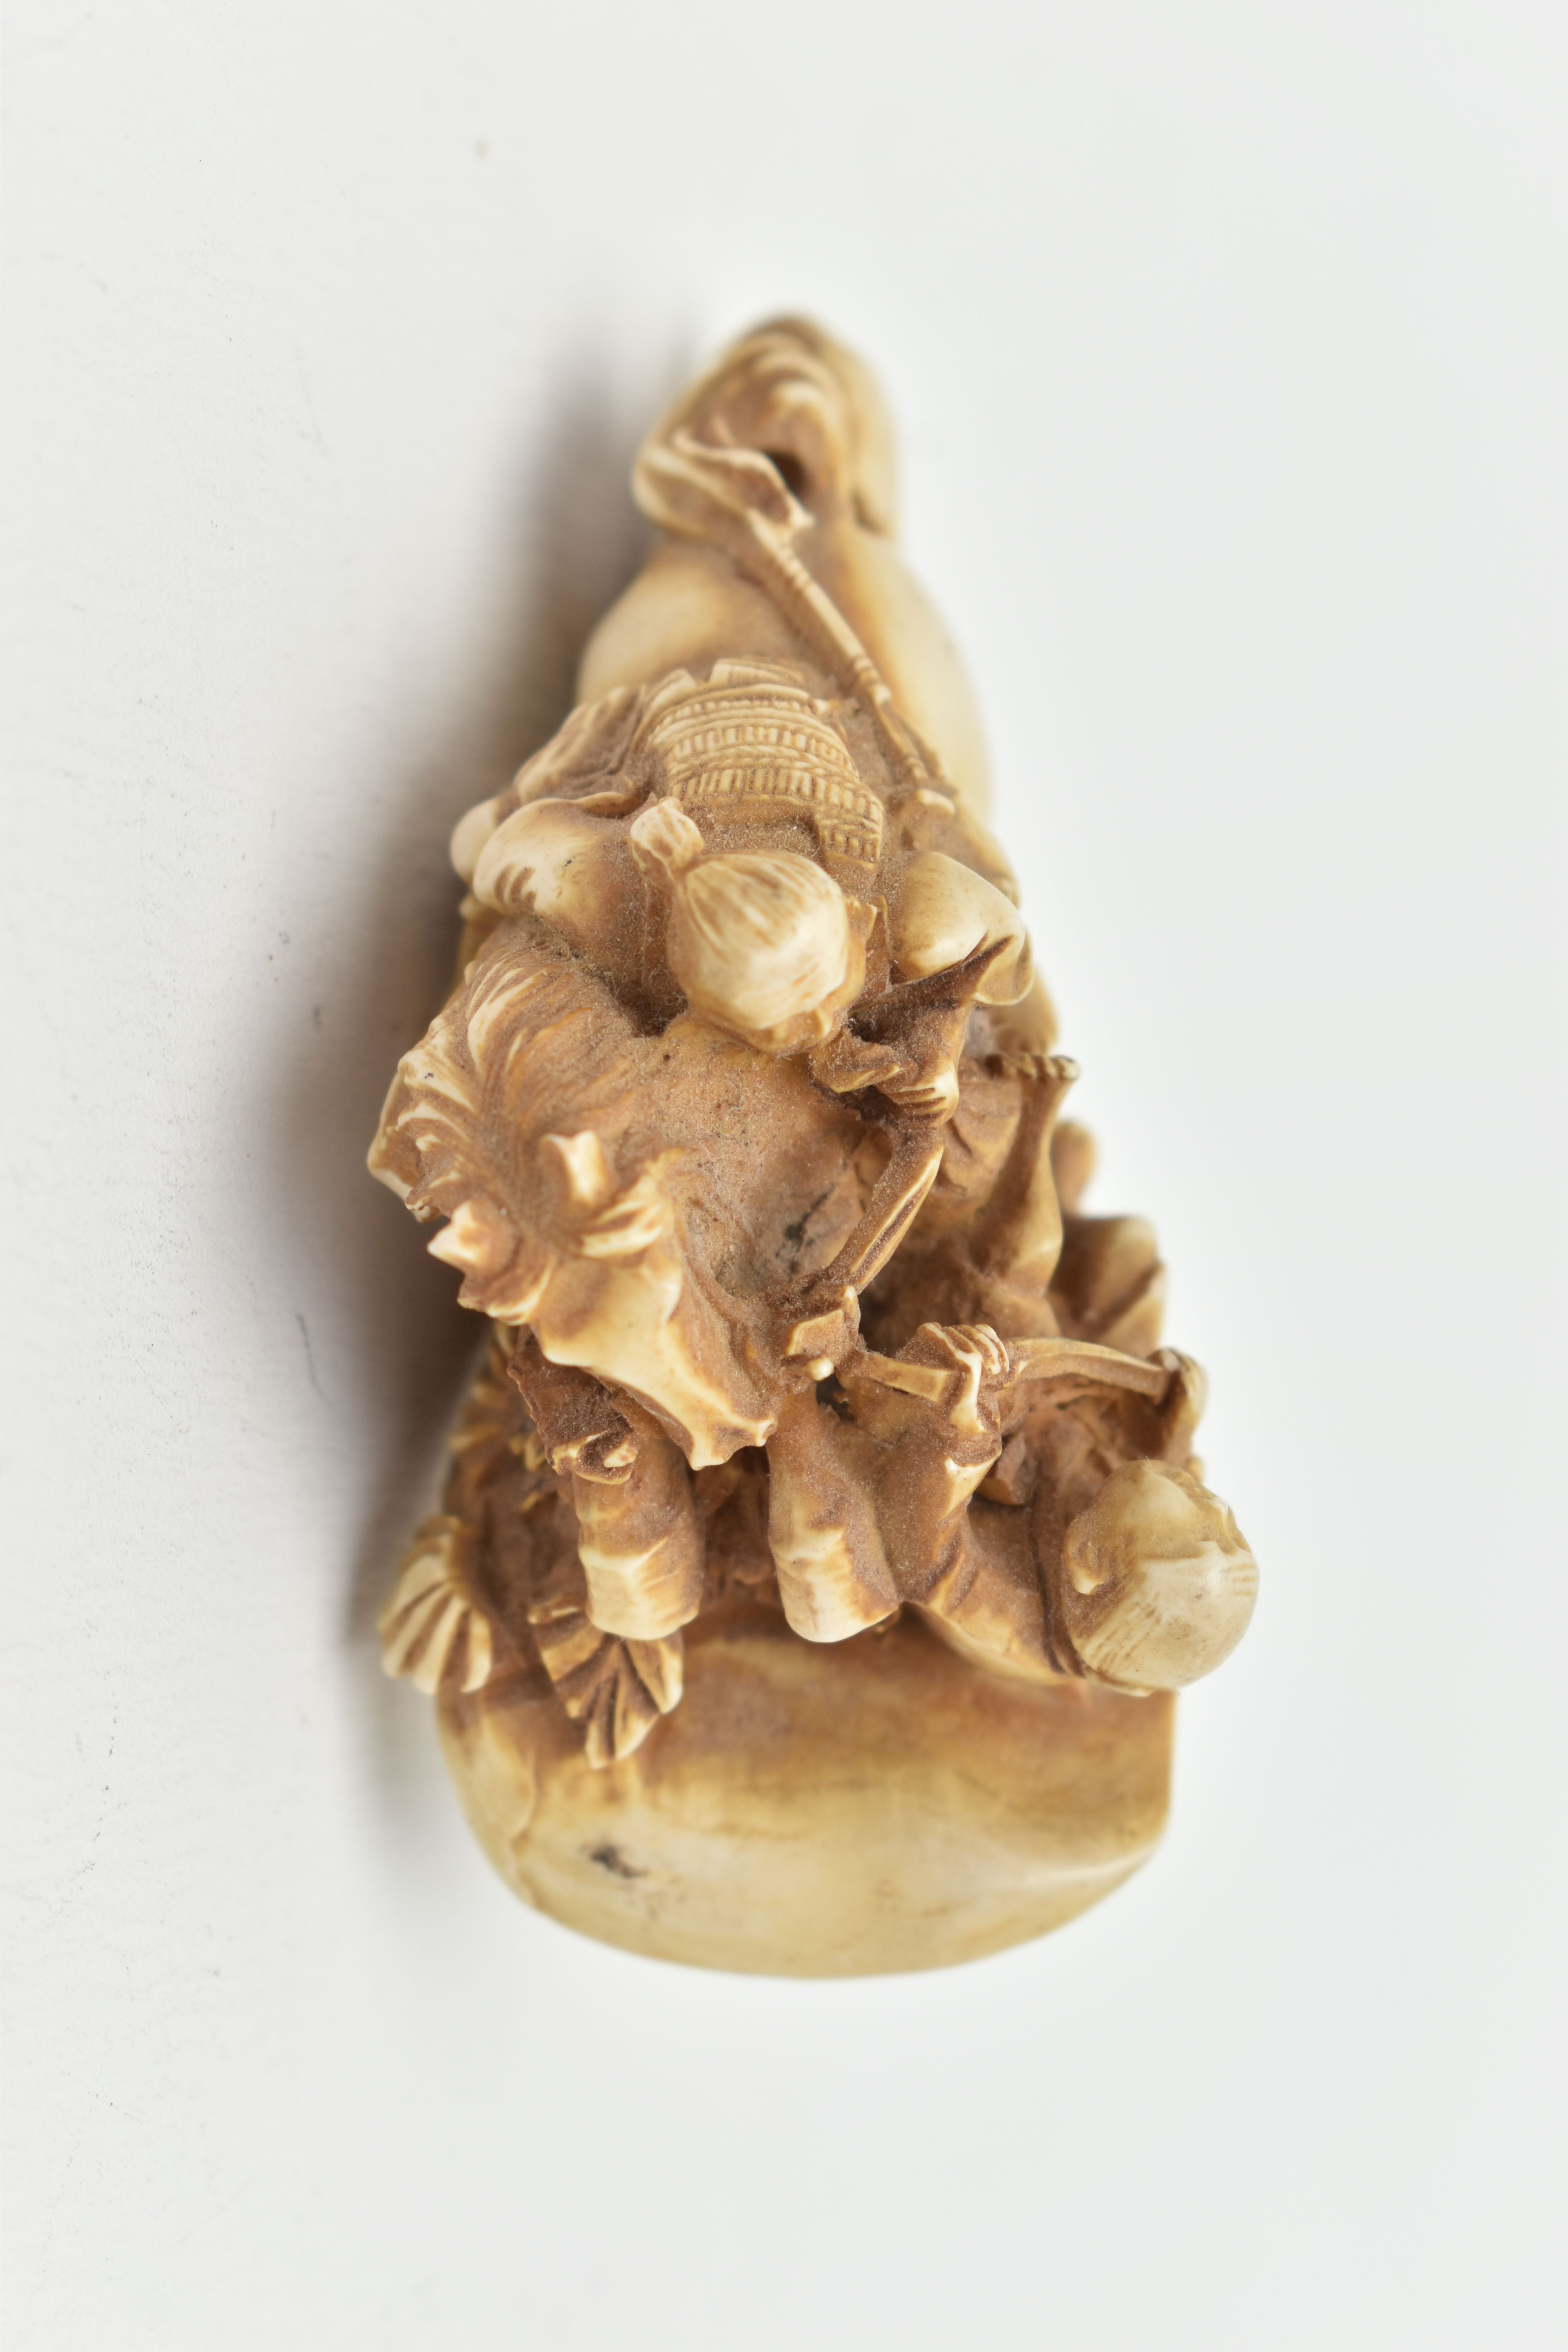 A BONE OKIMONO, a carved ornament depicting a man on a horse over a fallen down man, approximate - Image 7 of 7